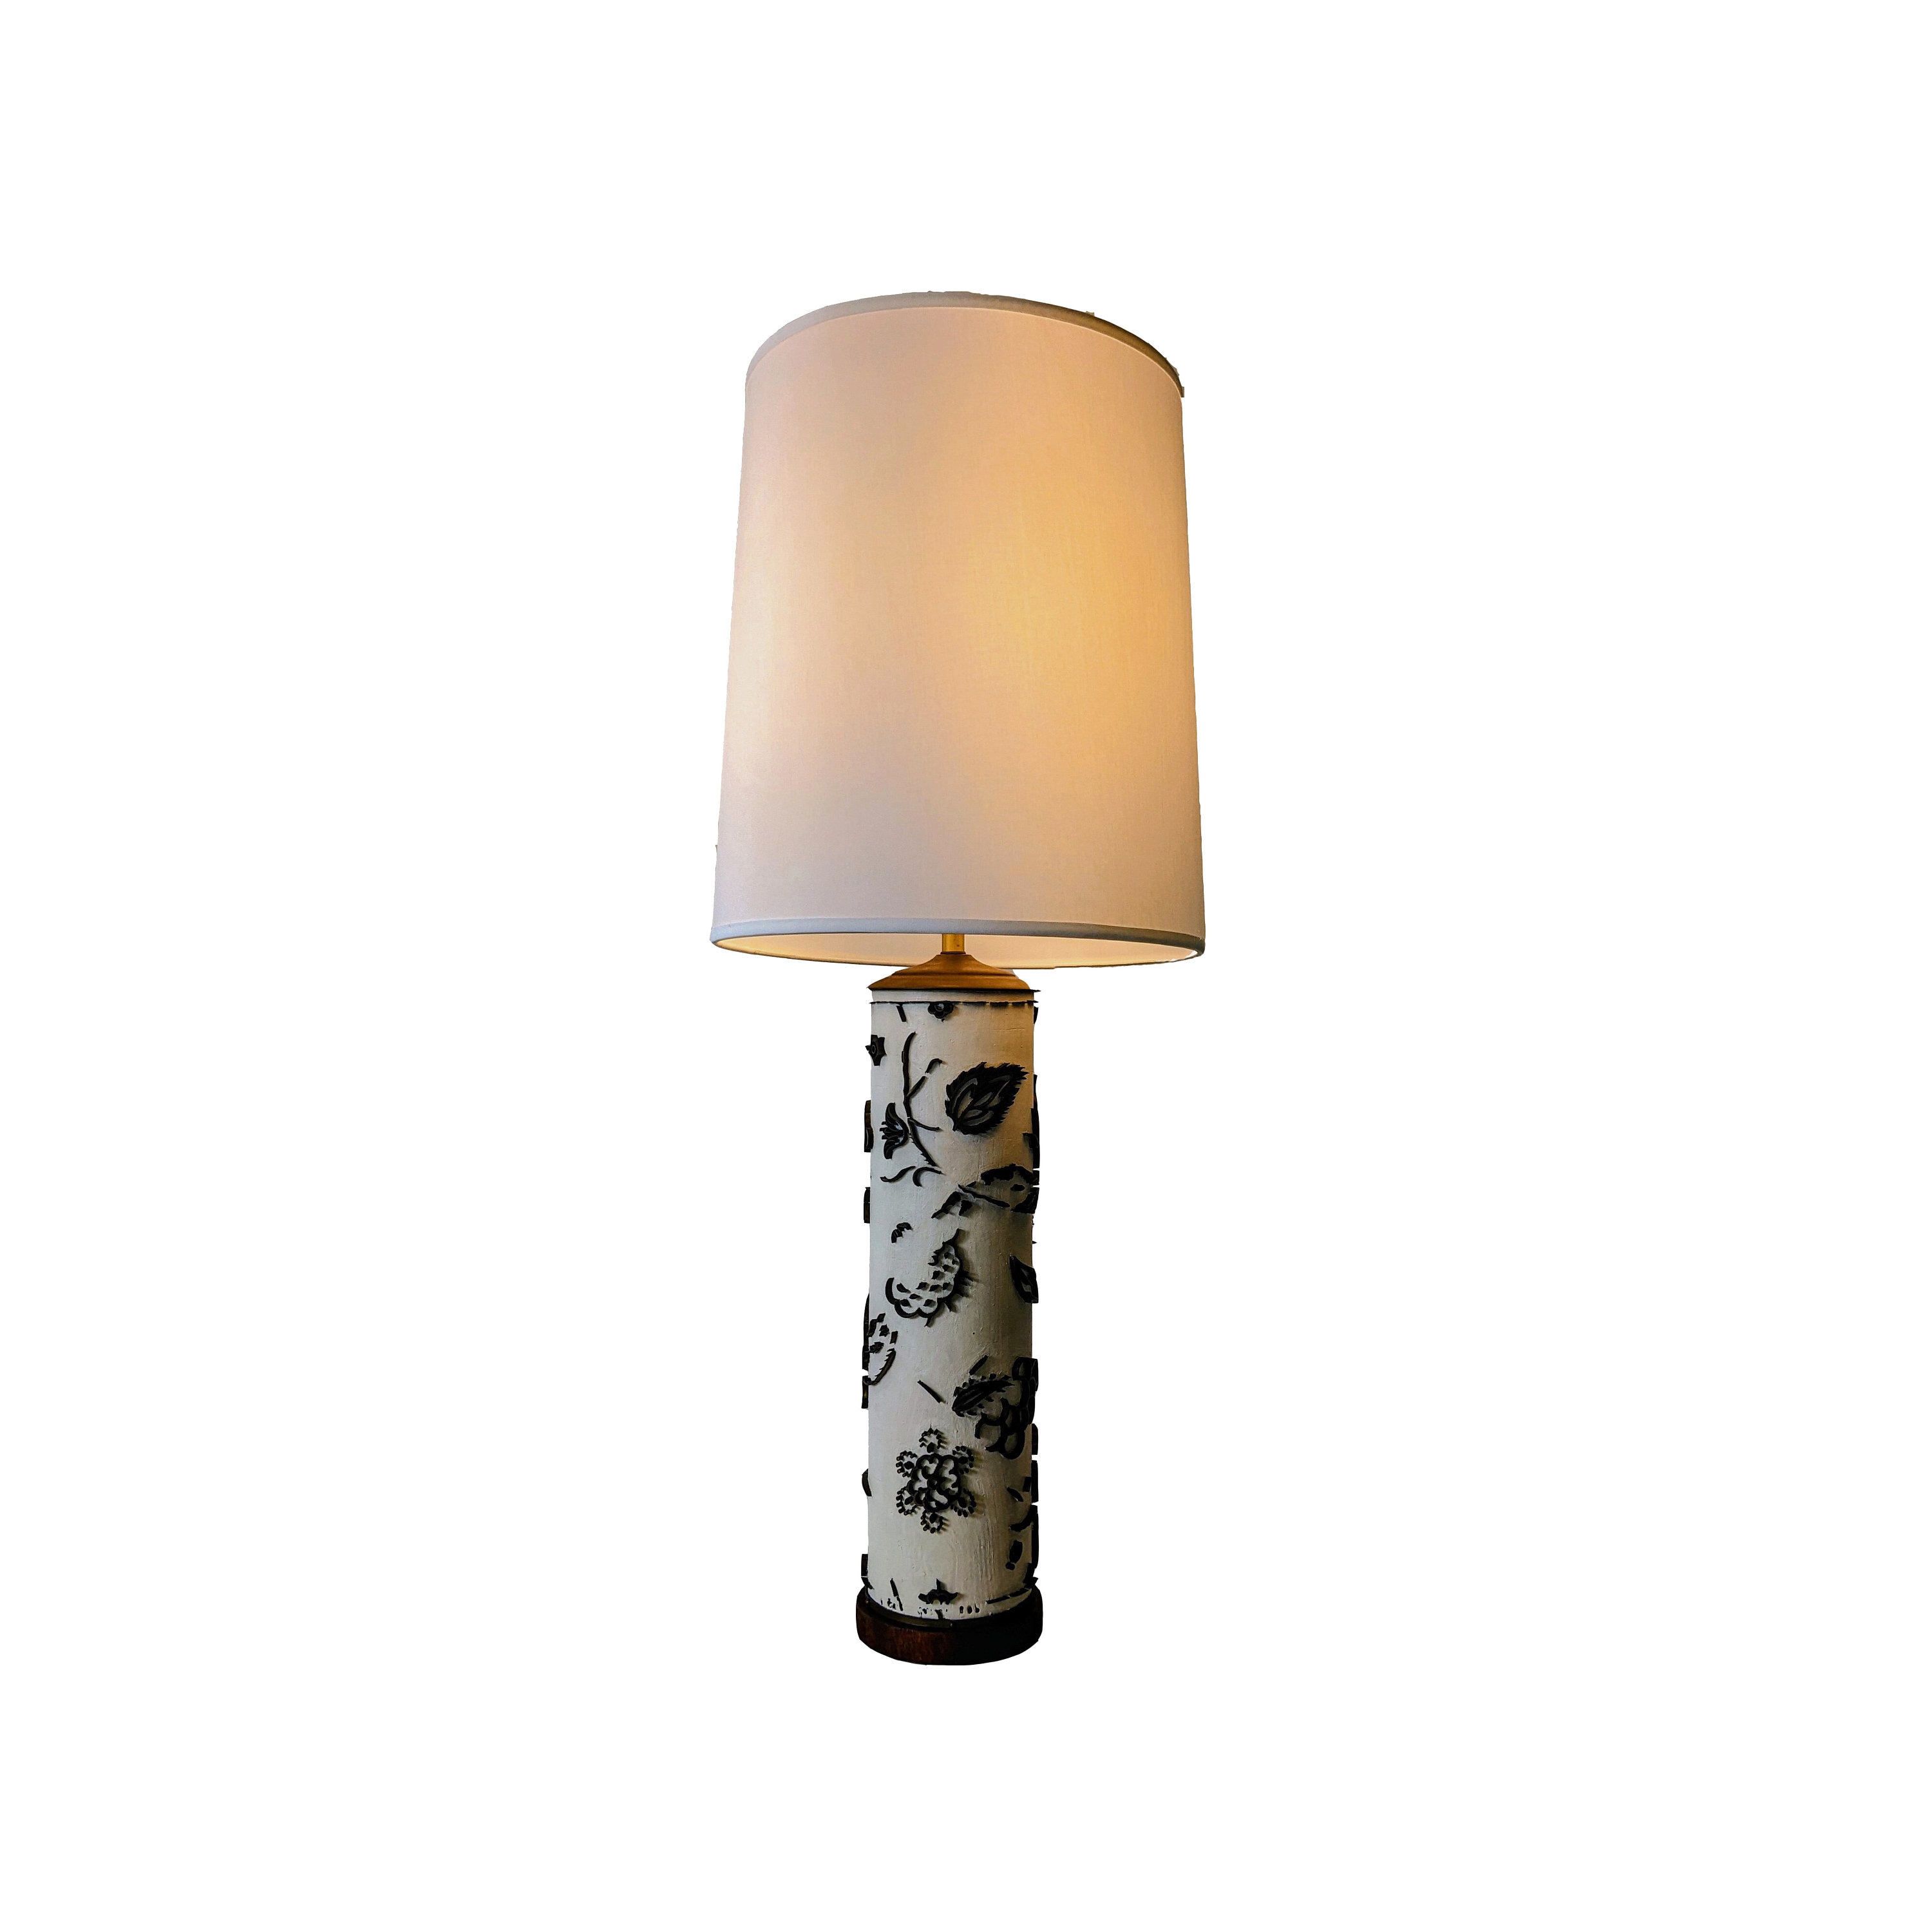 Set of 4 Striking Wallpaper Printing Roller Lamps from the 60's at